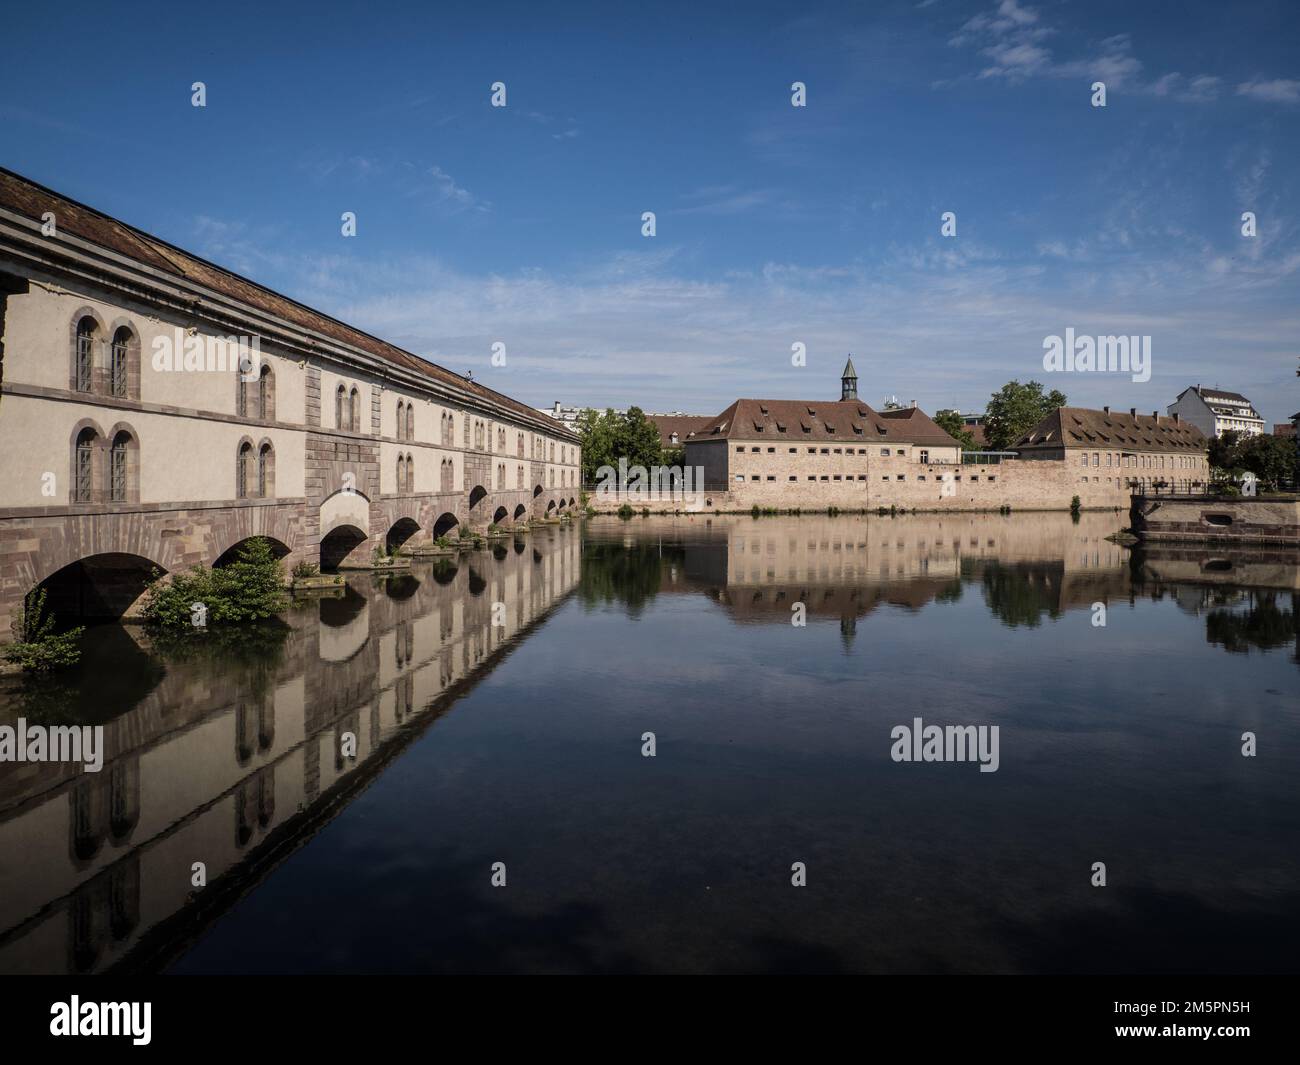 River Ill and canals, Petite France, Strasbourg, France Stock Photo